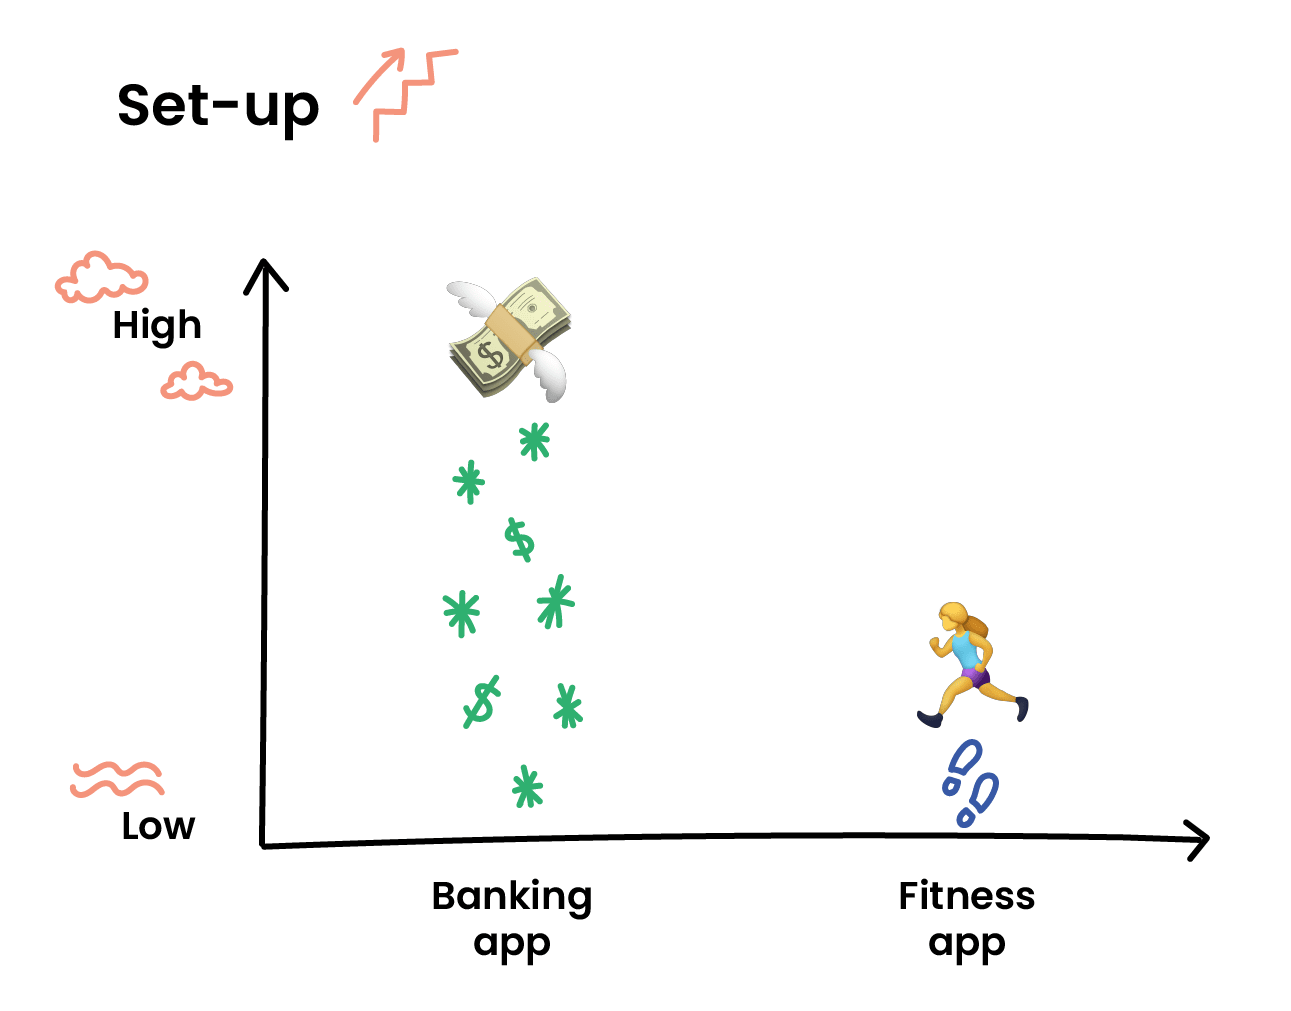 The banking app has large set up costs whereas the fitness app has low set up costs.